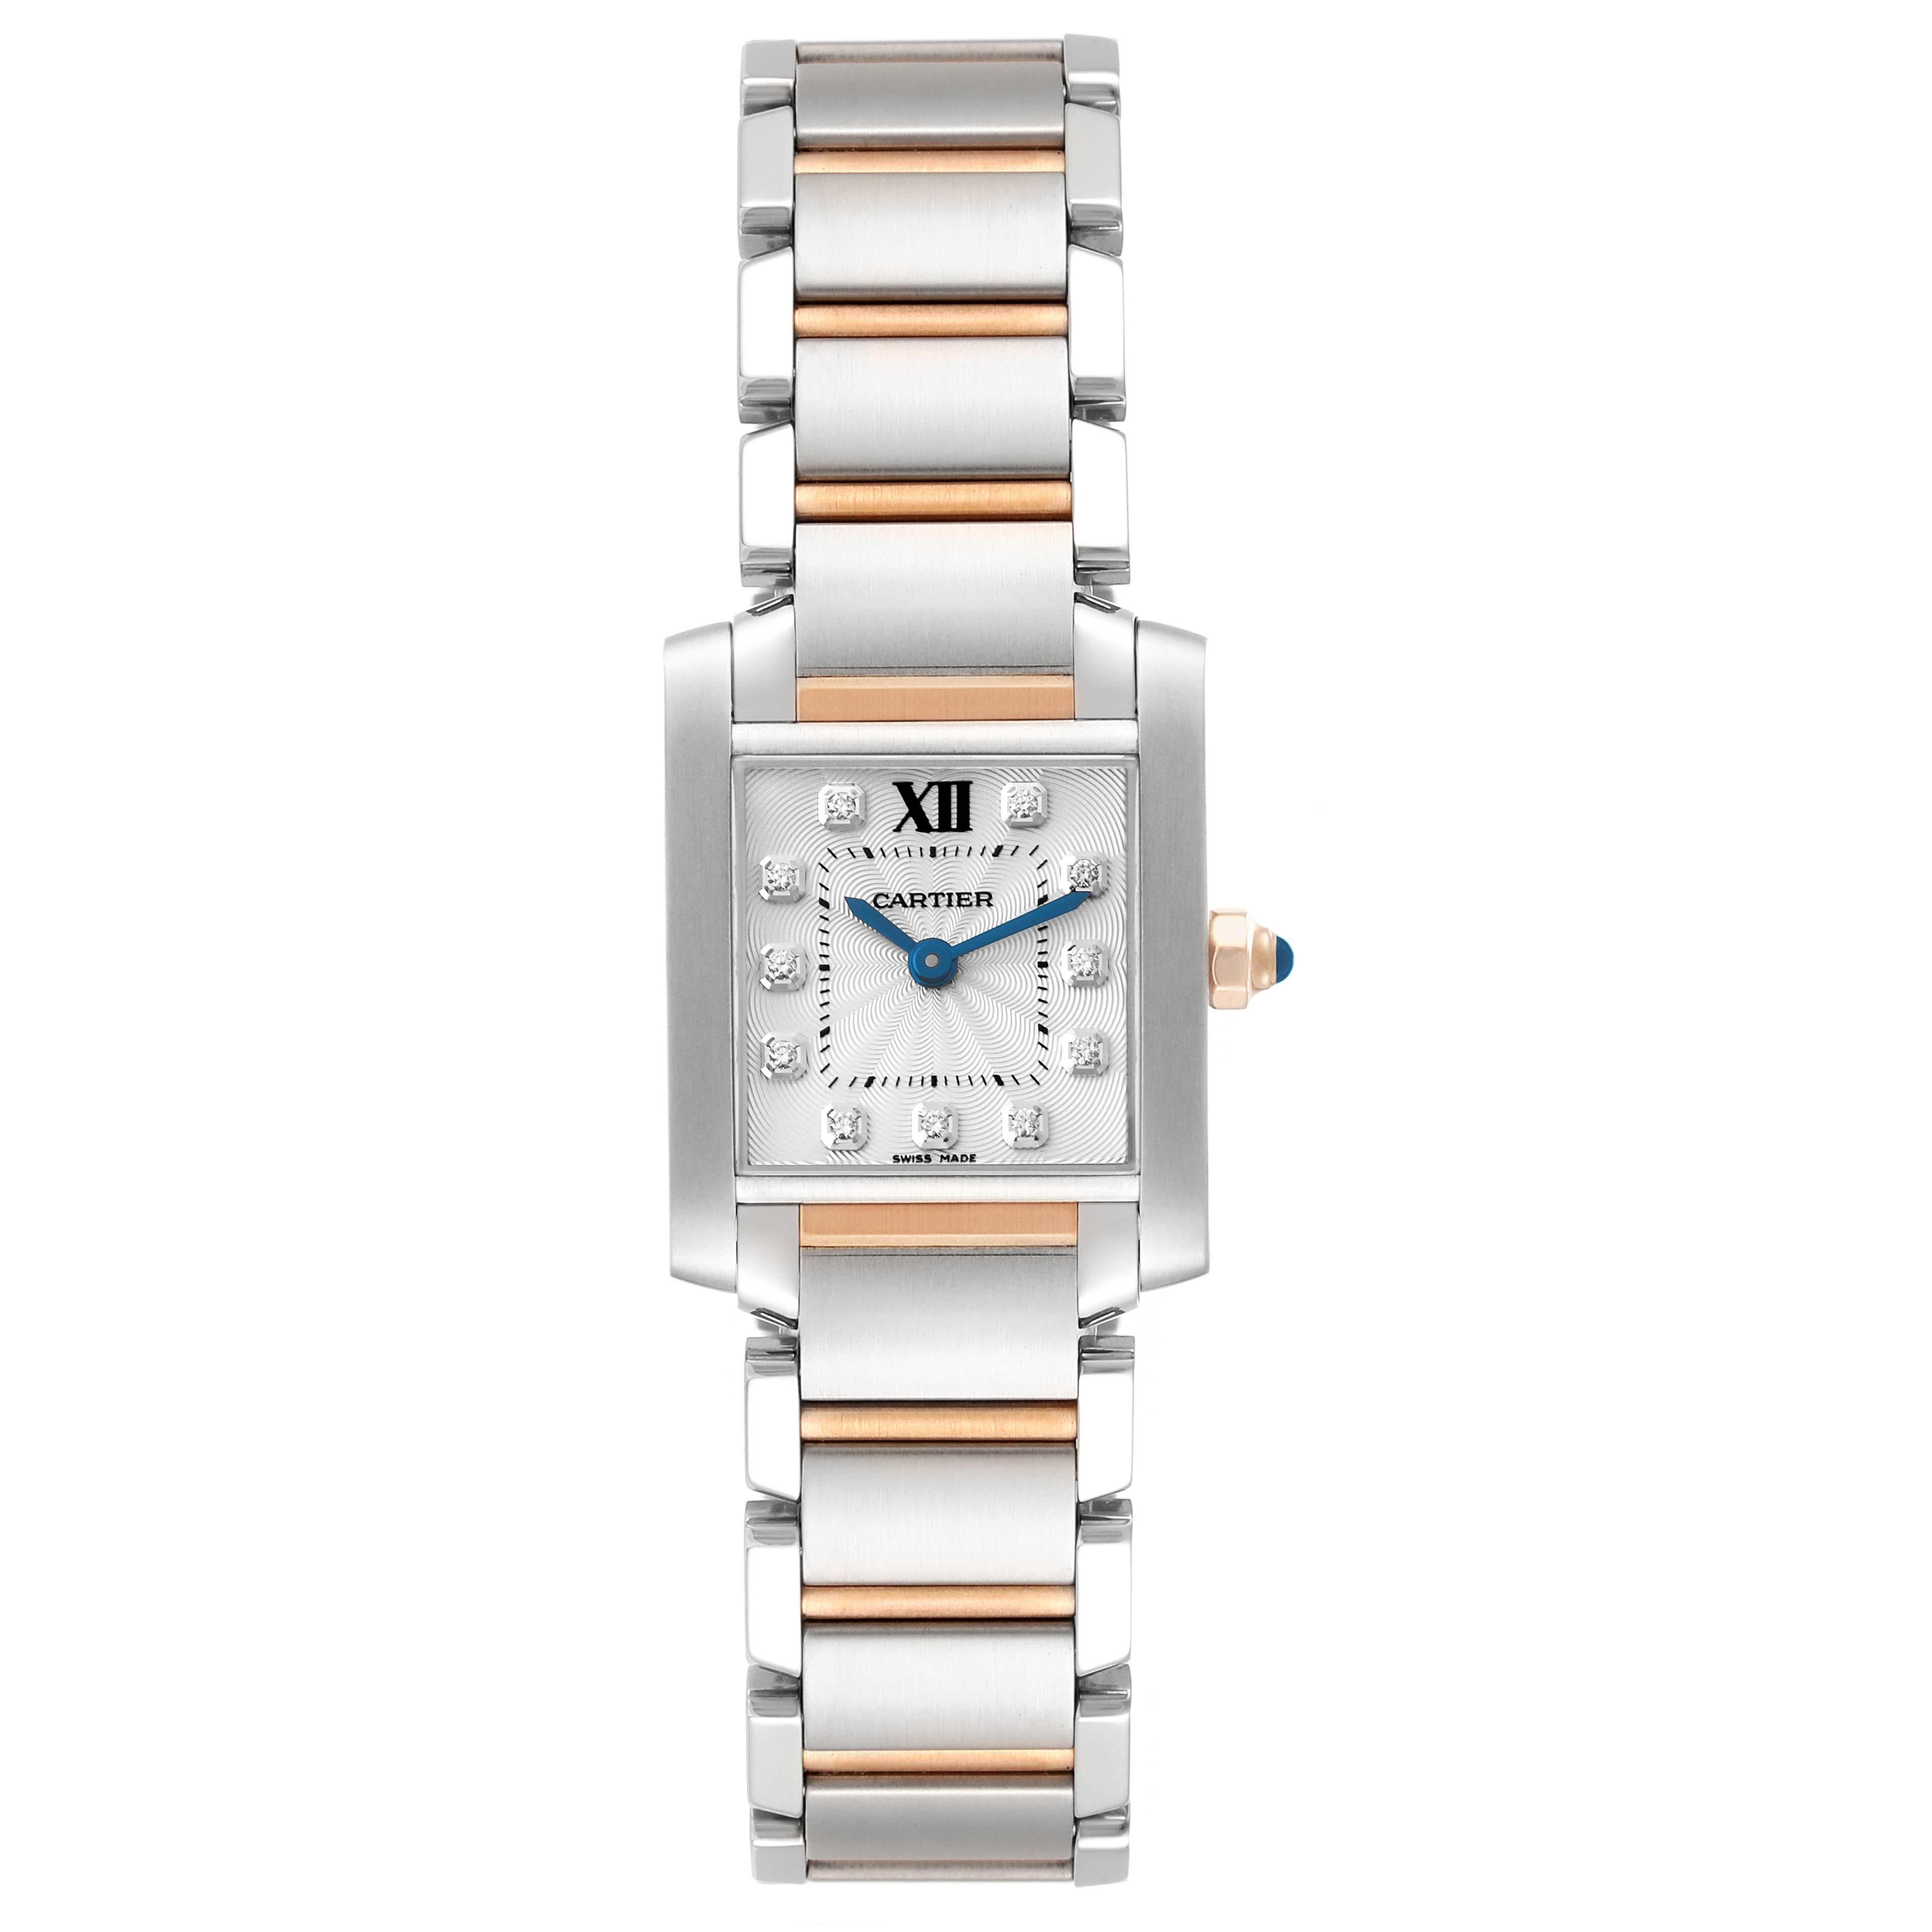 Cartier Tank Francaise Steel Rose Gold Diamond Ladies Watch WE110004 Box Card. Quartz movement. Stainless steel and rose gold rectangular case 20 mm x 25 mm. Octagonal 18k rose gold crown set with a blue spinel cabochon. . Scratch resistant sapphire